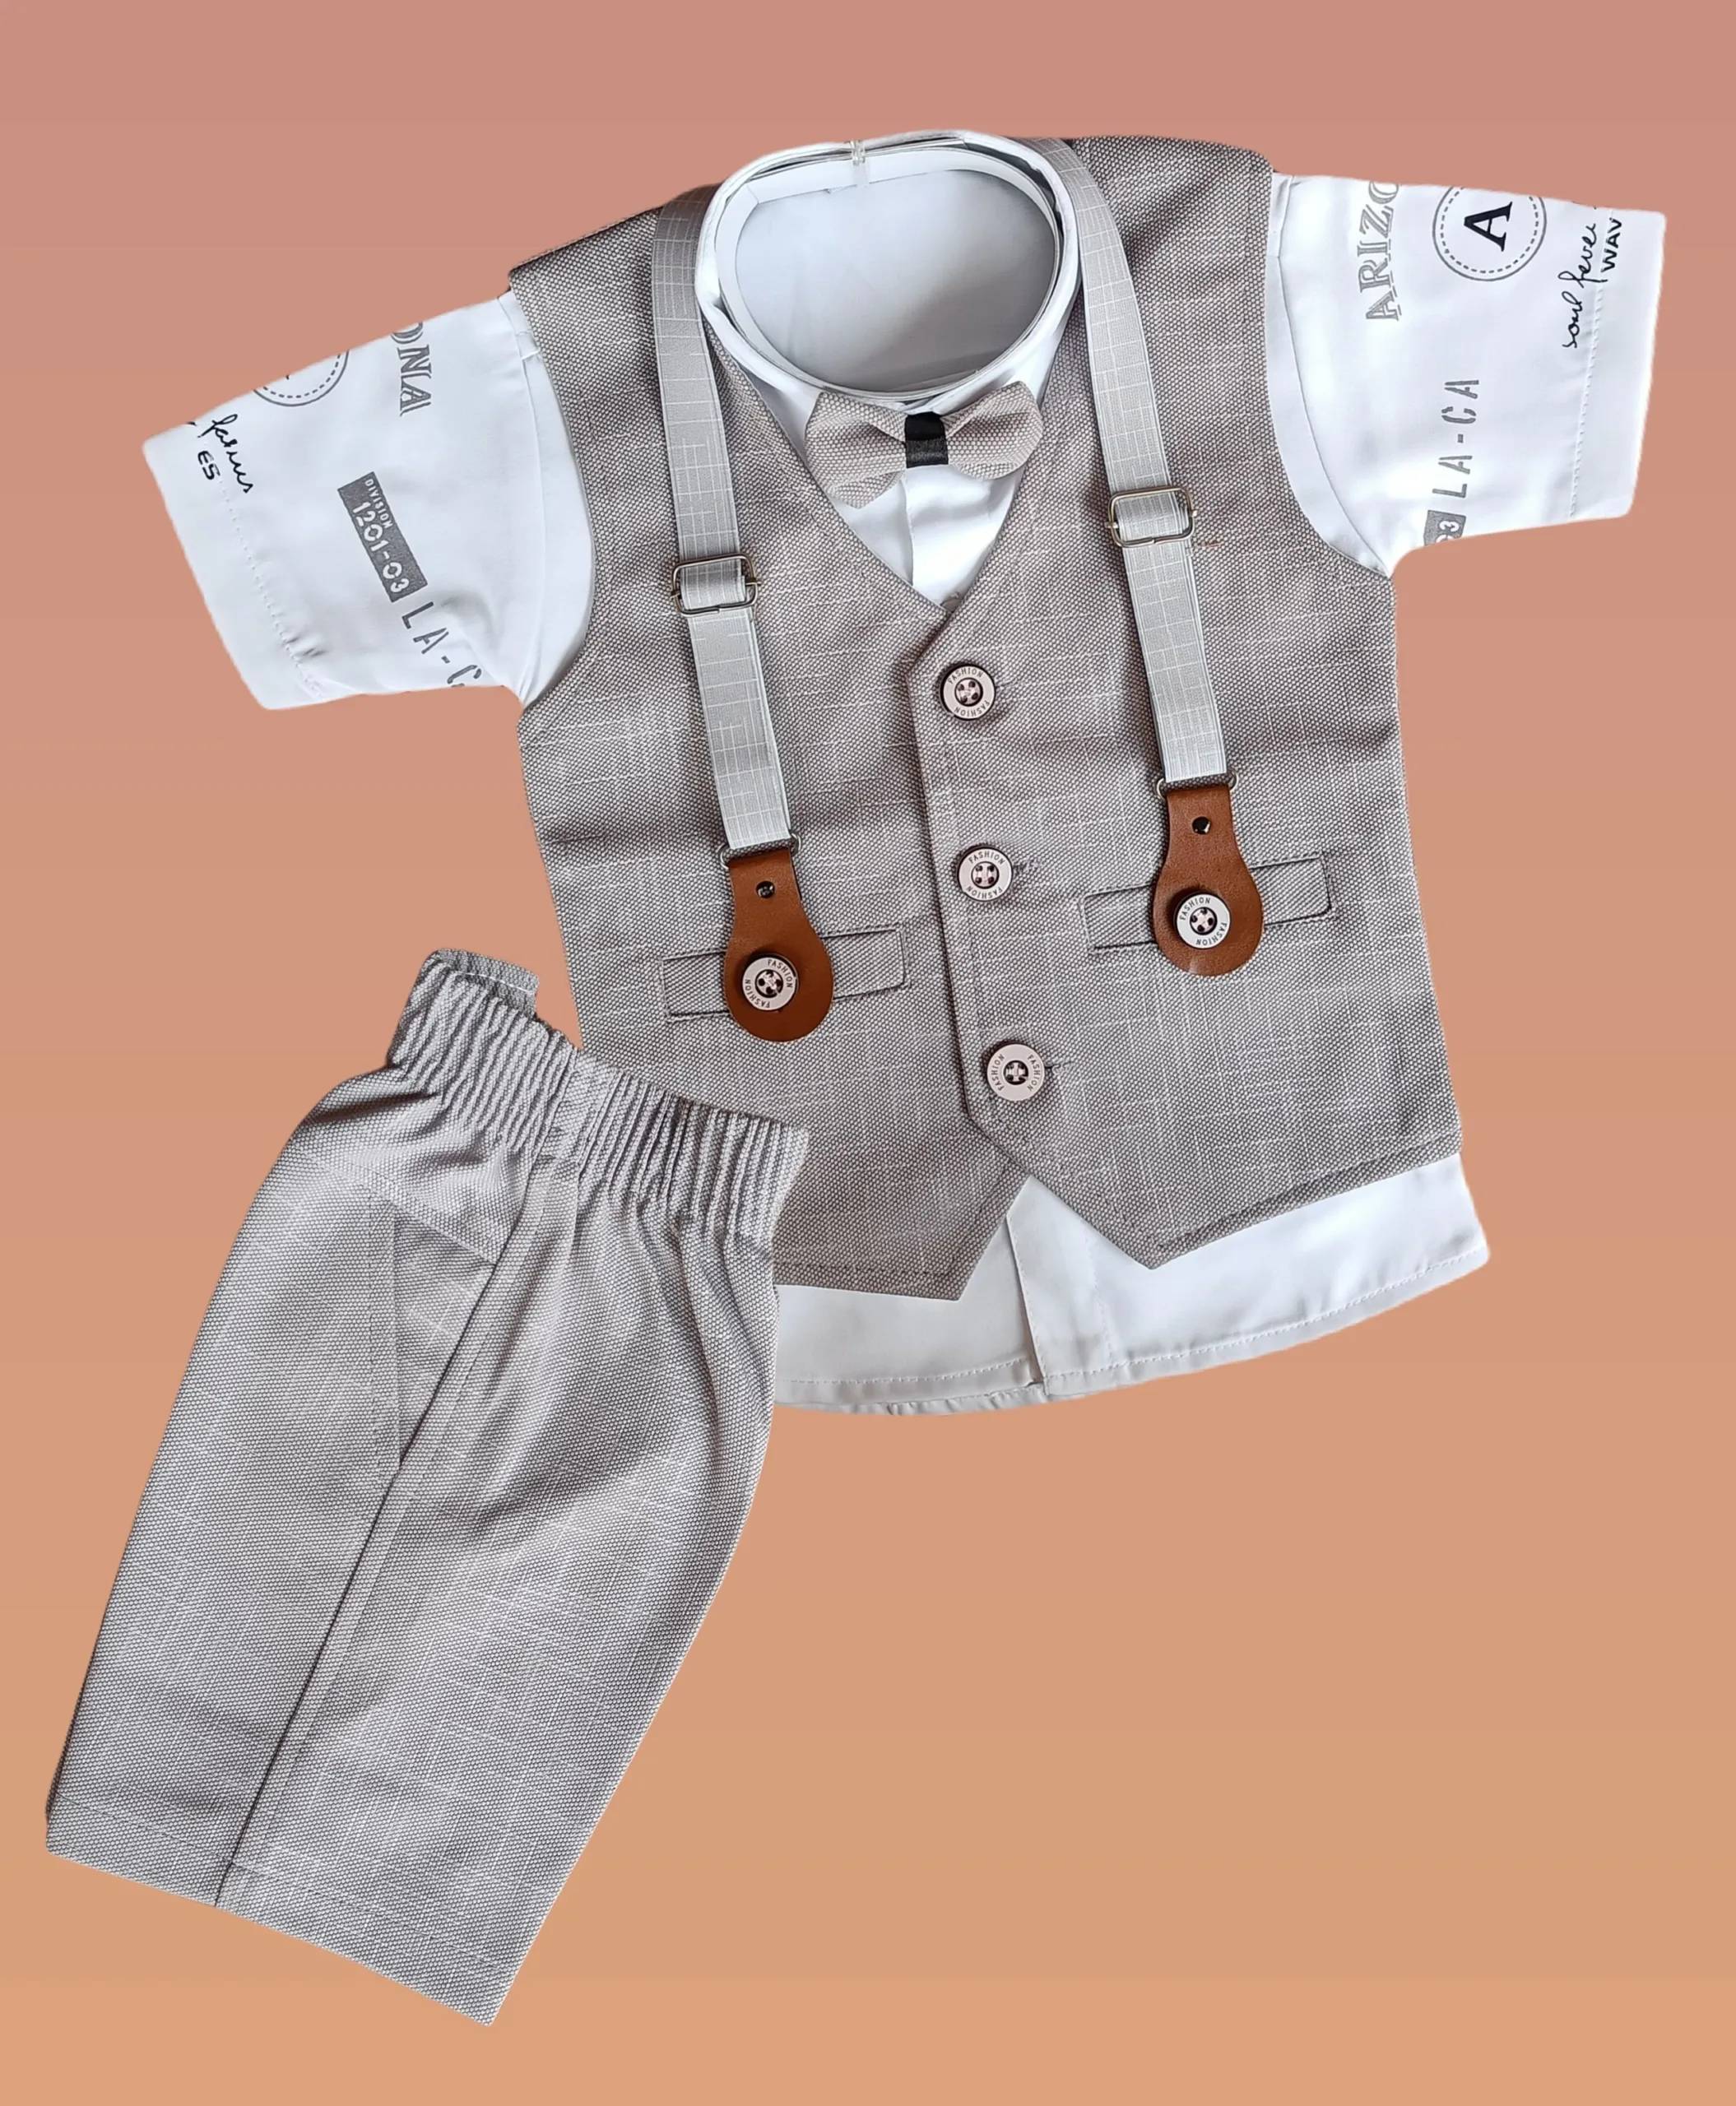 Baby Boys Clothes Size 0-24 Months | JCPenney